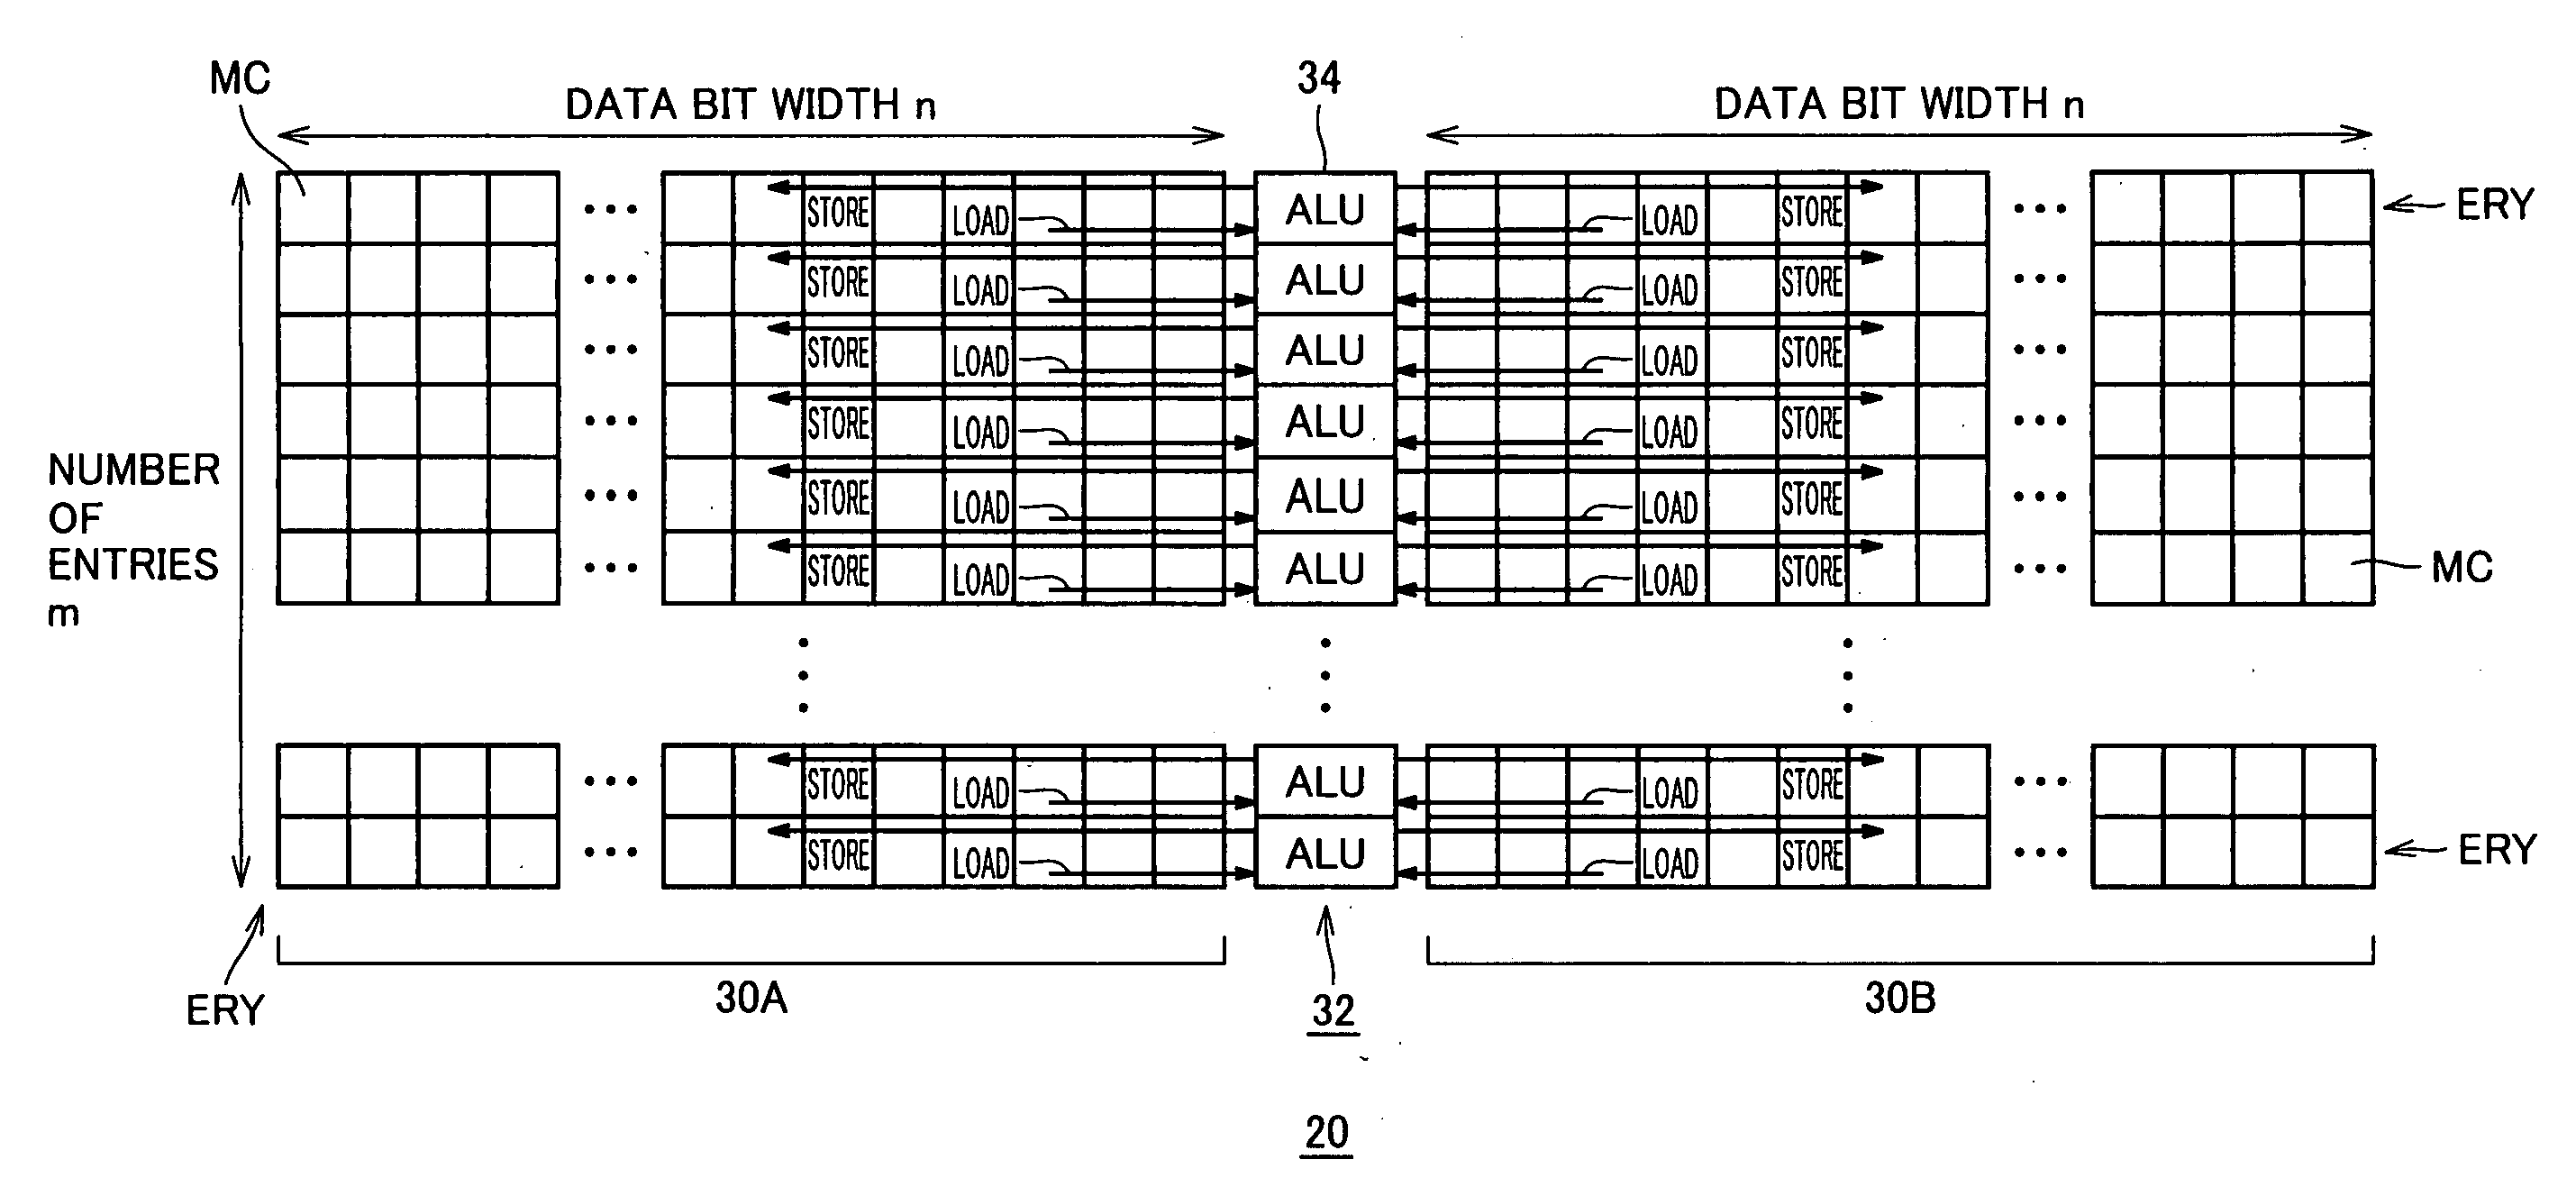 Parallel operational processing device